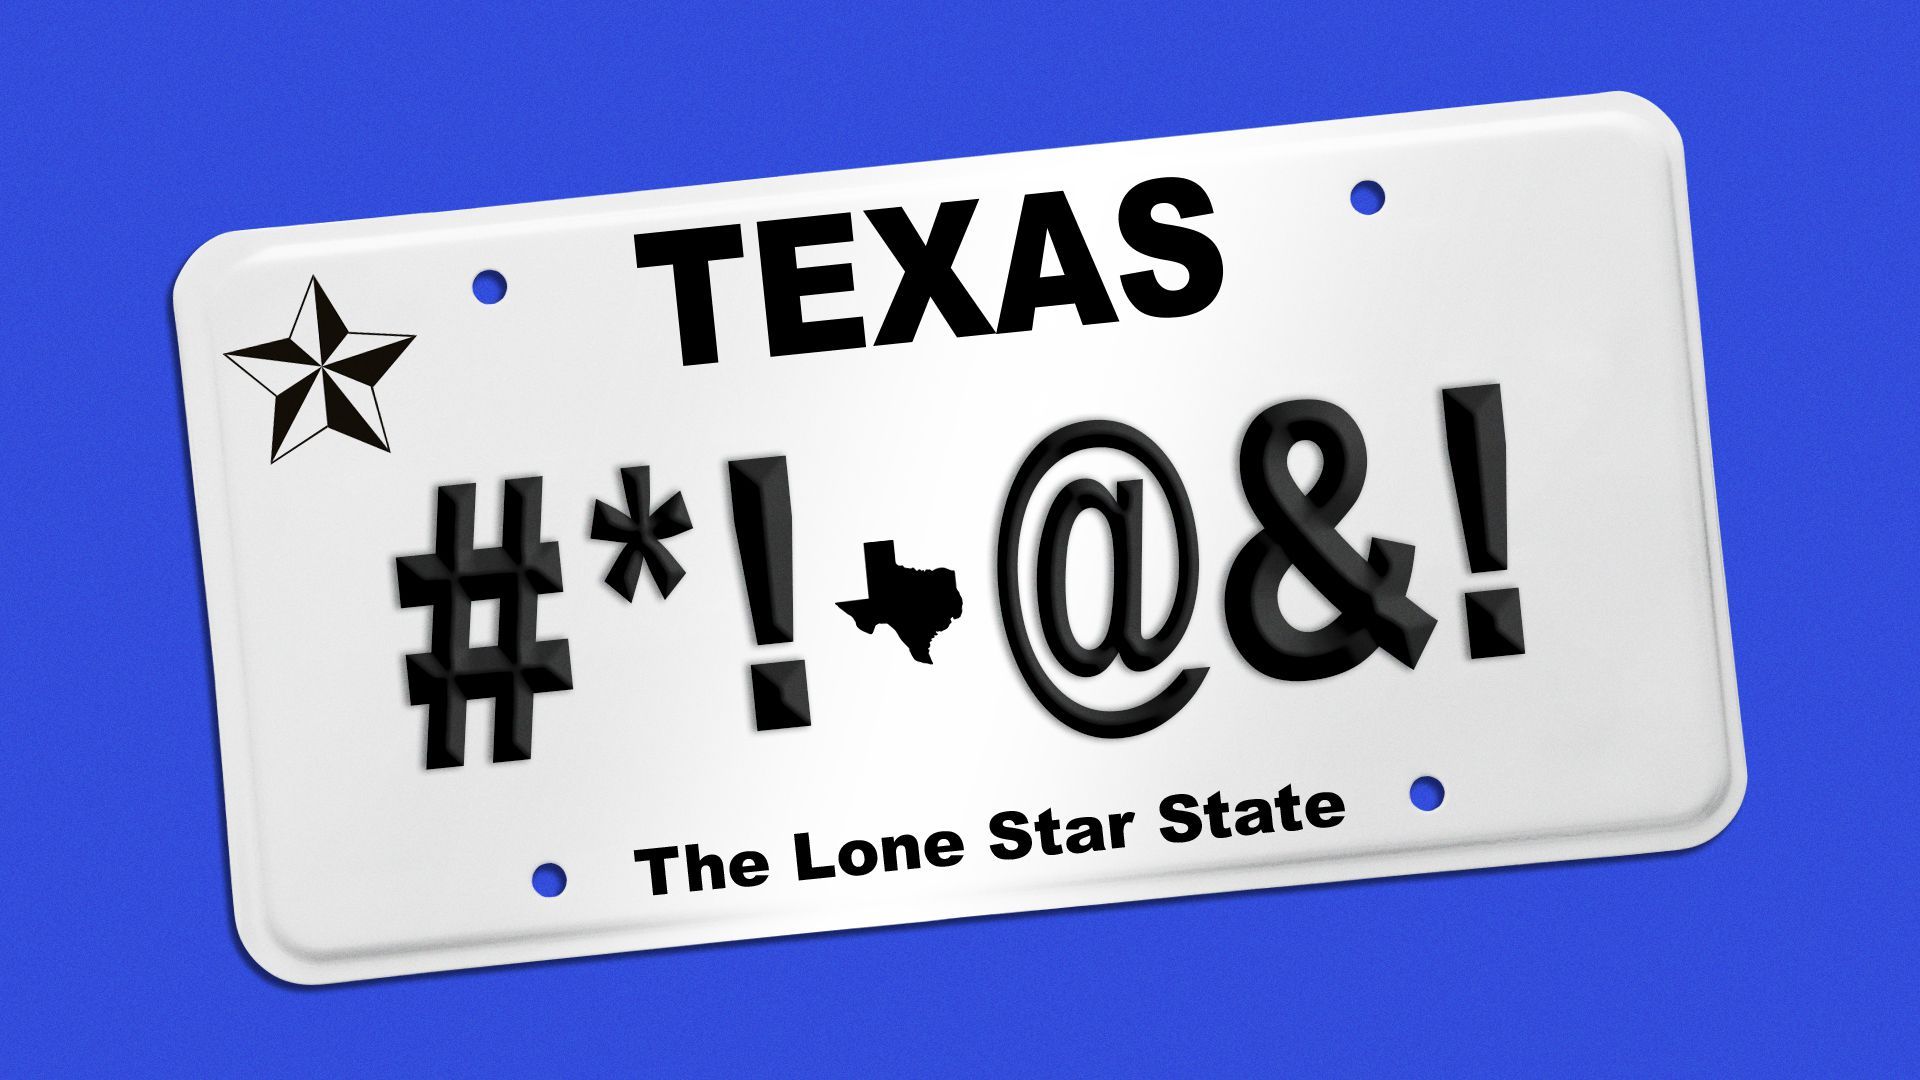 Illustration of a Texas vanity license plate with symbols implying a swear word.